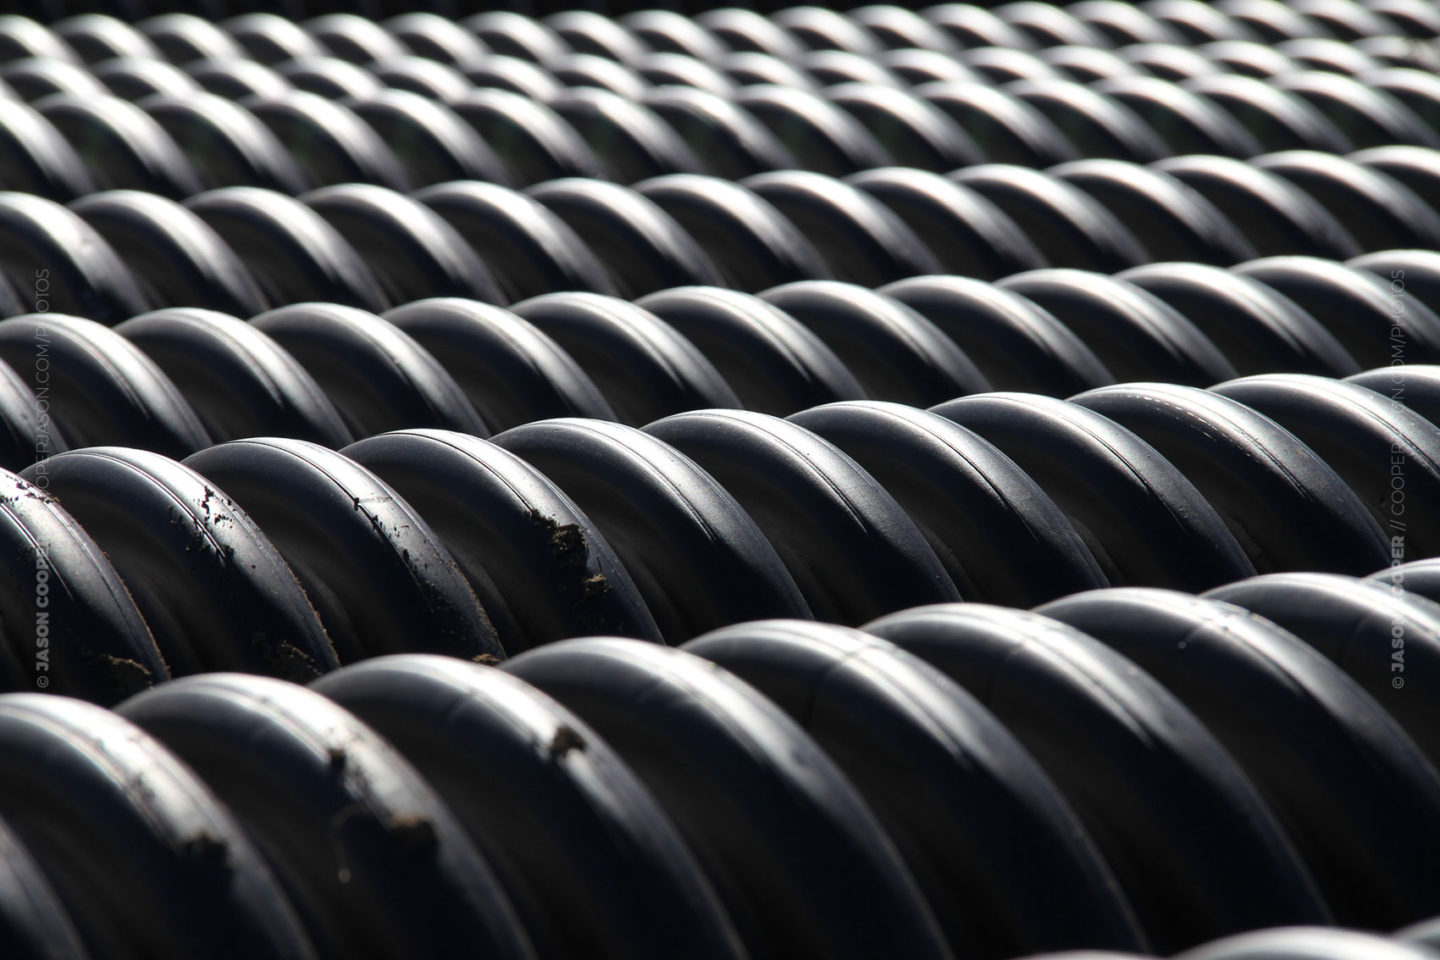 photos of a stack of corrugated black pipe in a construction area